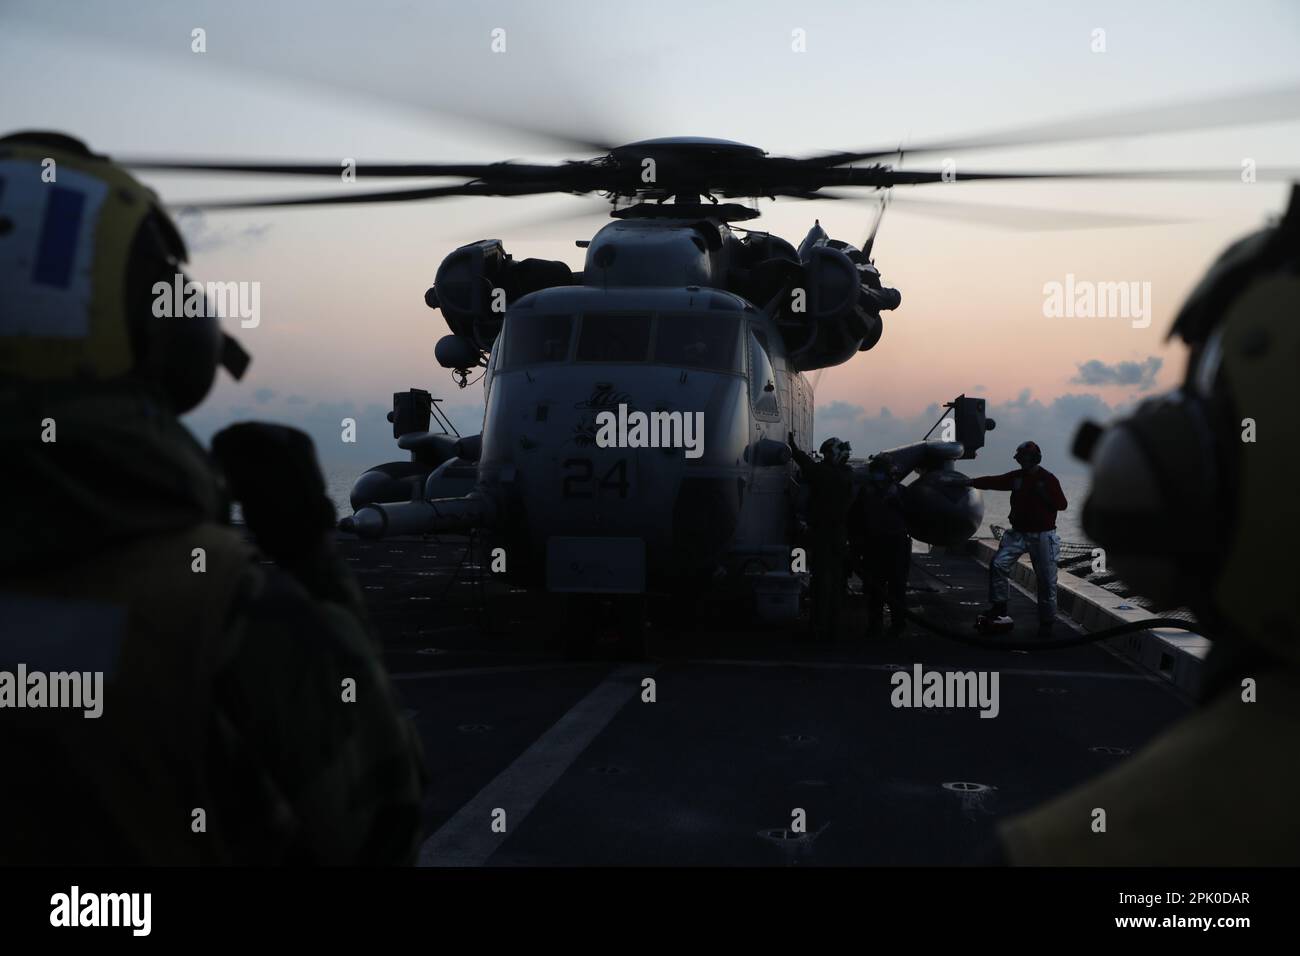 South China Sea (March. 21, 2023) – U.S. Marines assigned to Marine Medium Tiltrotor Squadron (VMM) 362 (Reinforced), 13th Marine Expeditionary Unit, and Sailors assigned to the amphibious transport dock USS John P. Murtha (LPD 26) prepare a CH-53E Super Stallion for take-off aboard the John P. Murtha, March 21. The mobility and sustainability provided by amphibious platforms like the CH-53E Super Stallion enable the Navy-Marine Corps team to extend the reach of our capabilities. The 13th MEU is embarked with the Makin Island Amphibious Ready Group, comprised of the amphibious assault ship USS Stock Photo